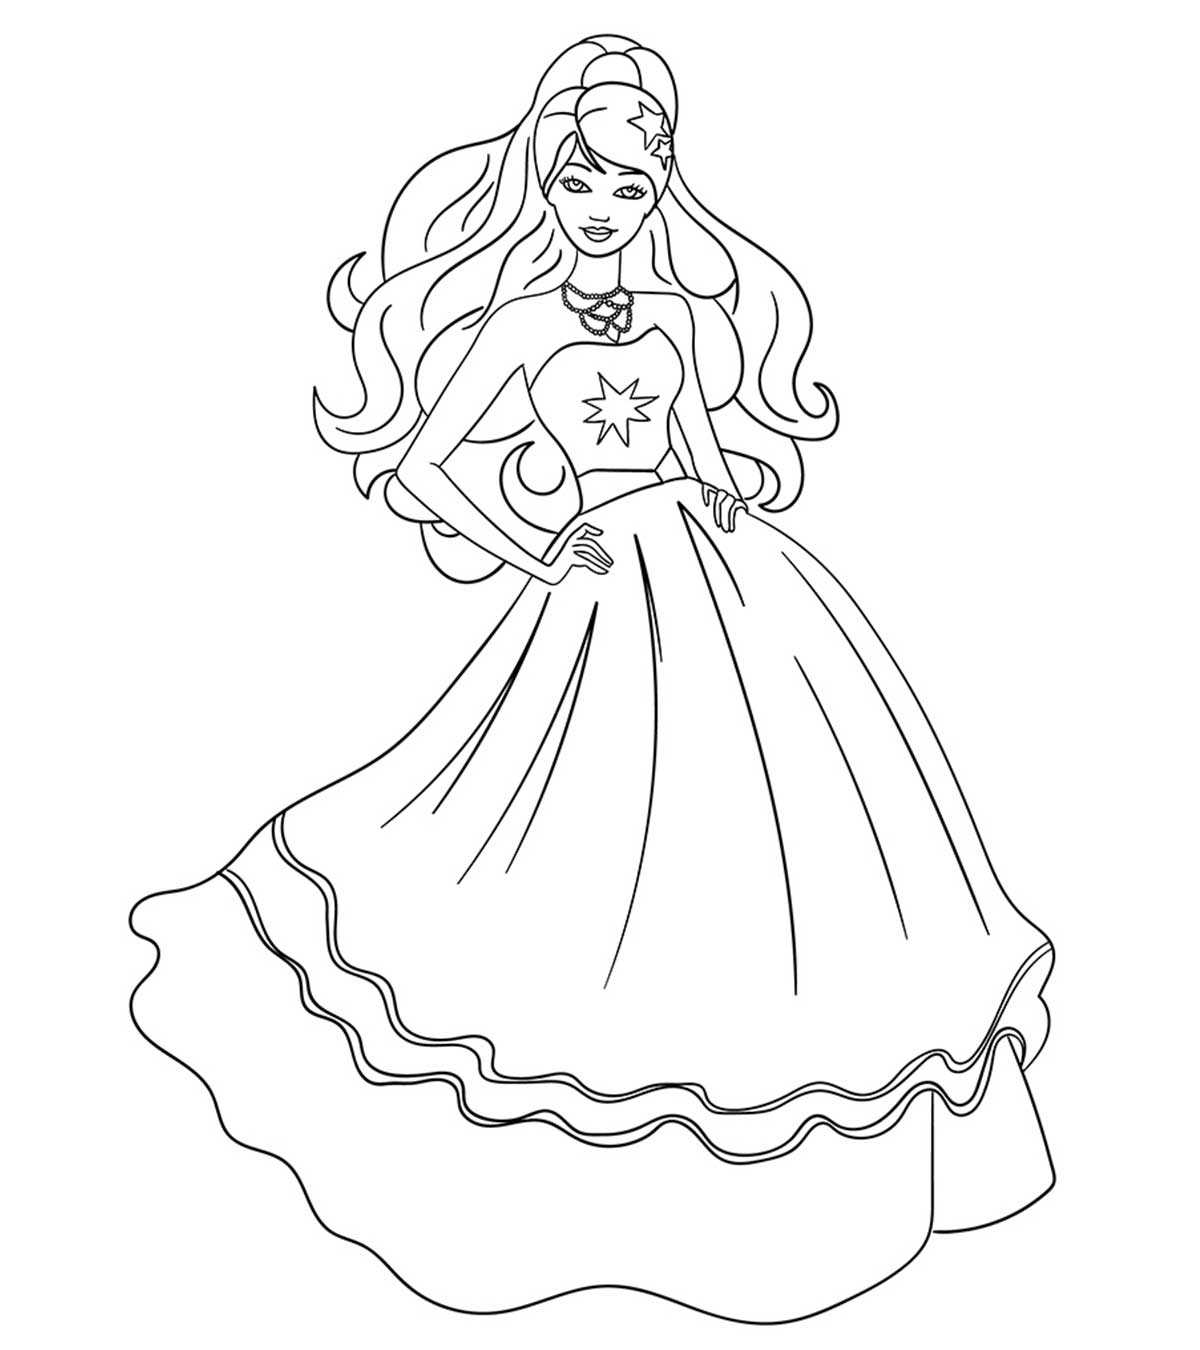 50 Beautiful Barbie Coloring Pages Your Kids Will Love